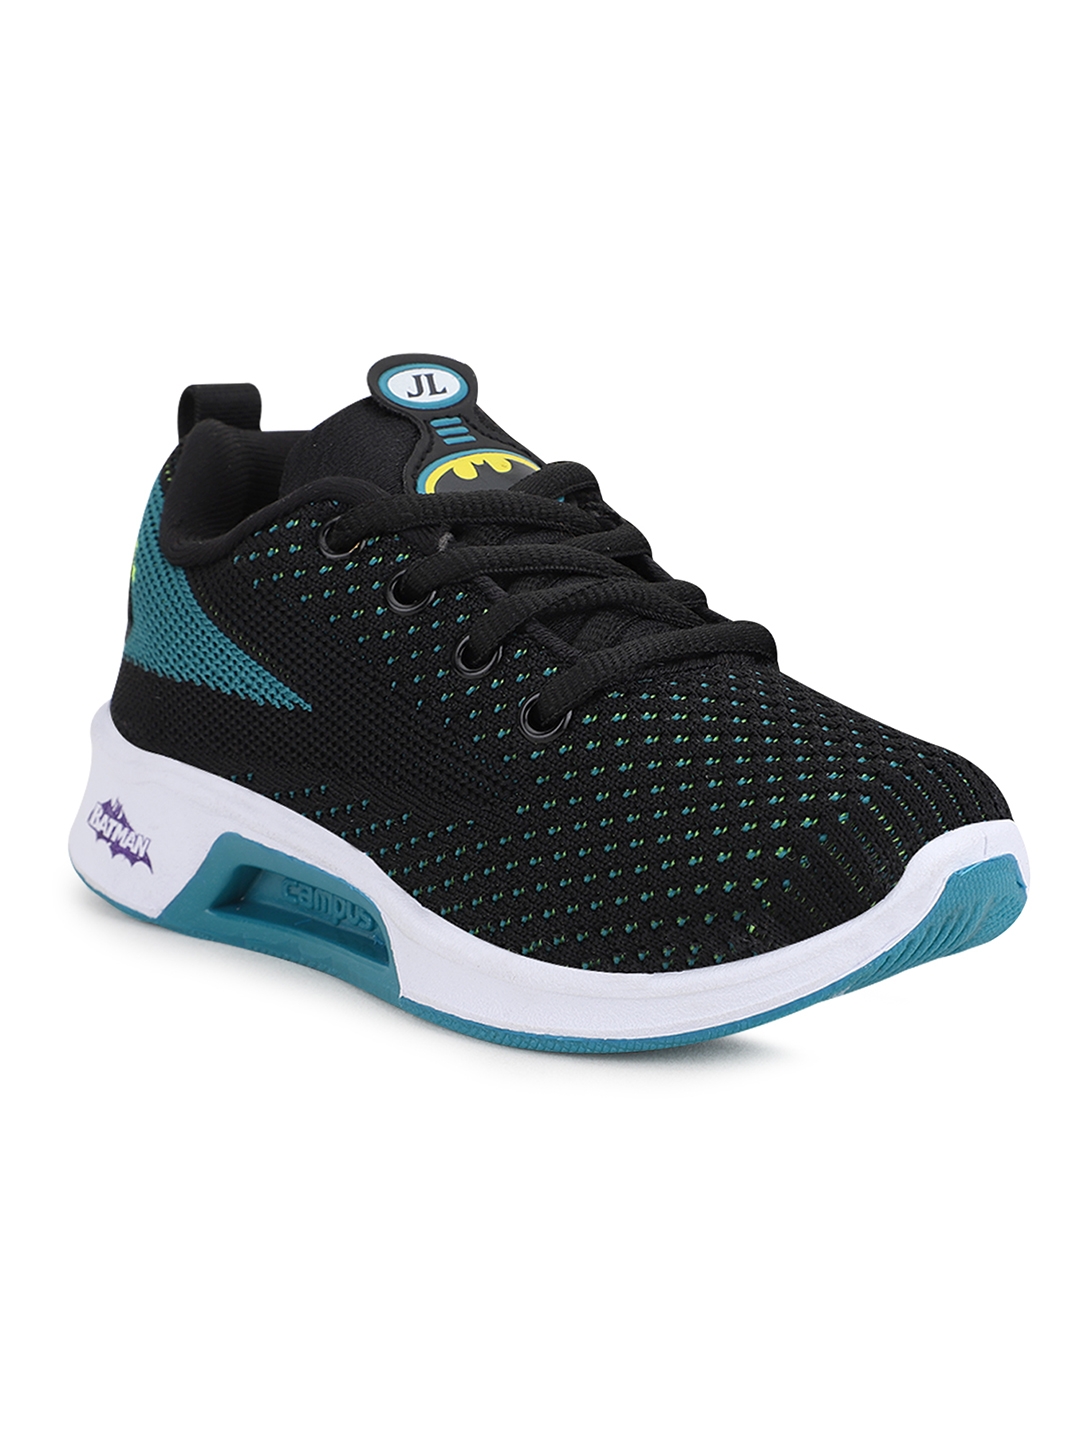 Campus Shoes | Black Hm-502 Running Shoes